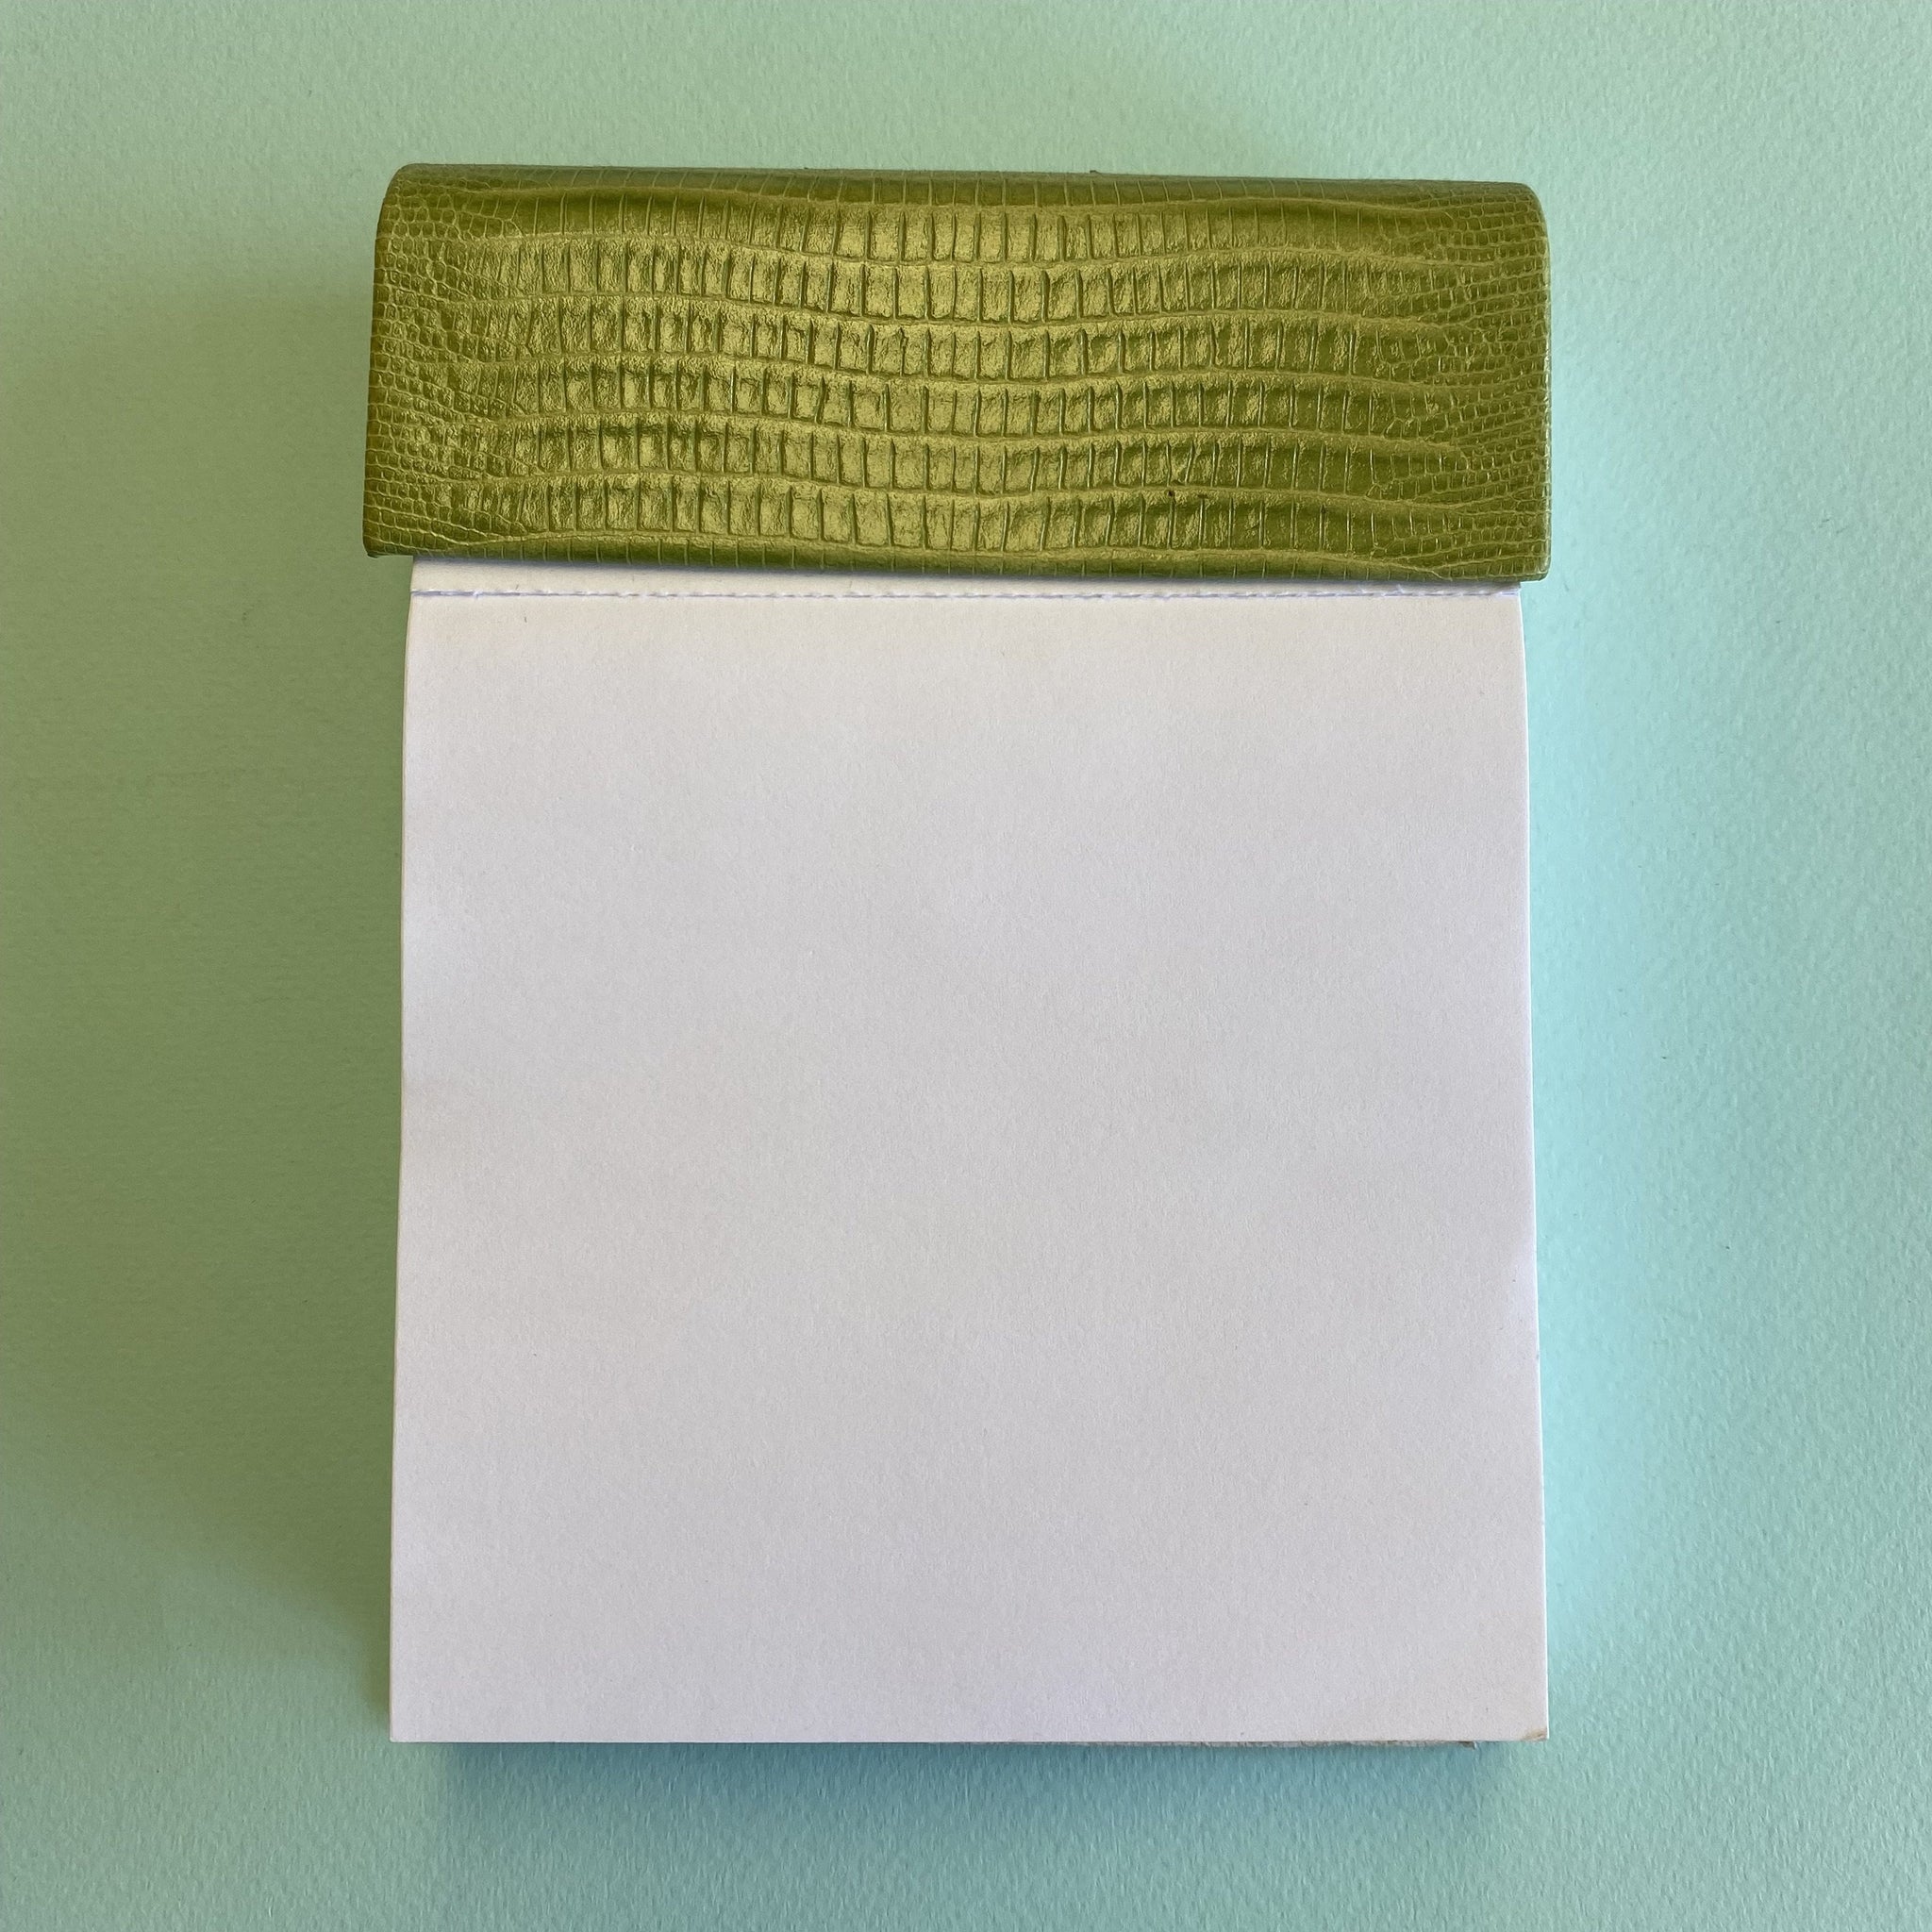 Leather Covered Memo Pad Holder - Apple Green